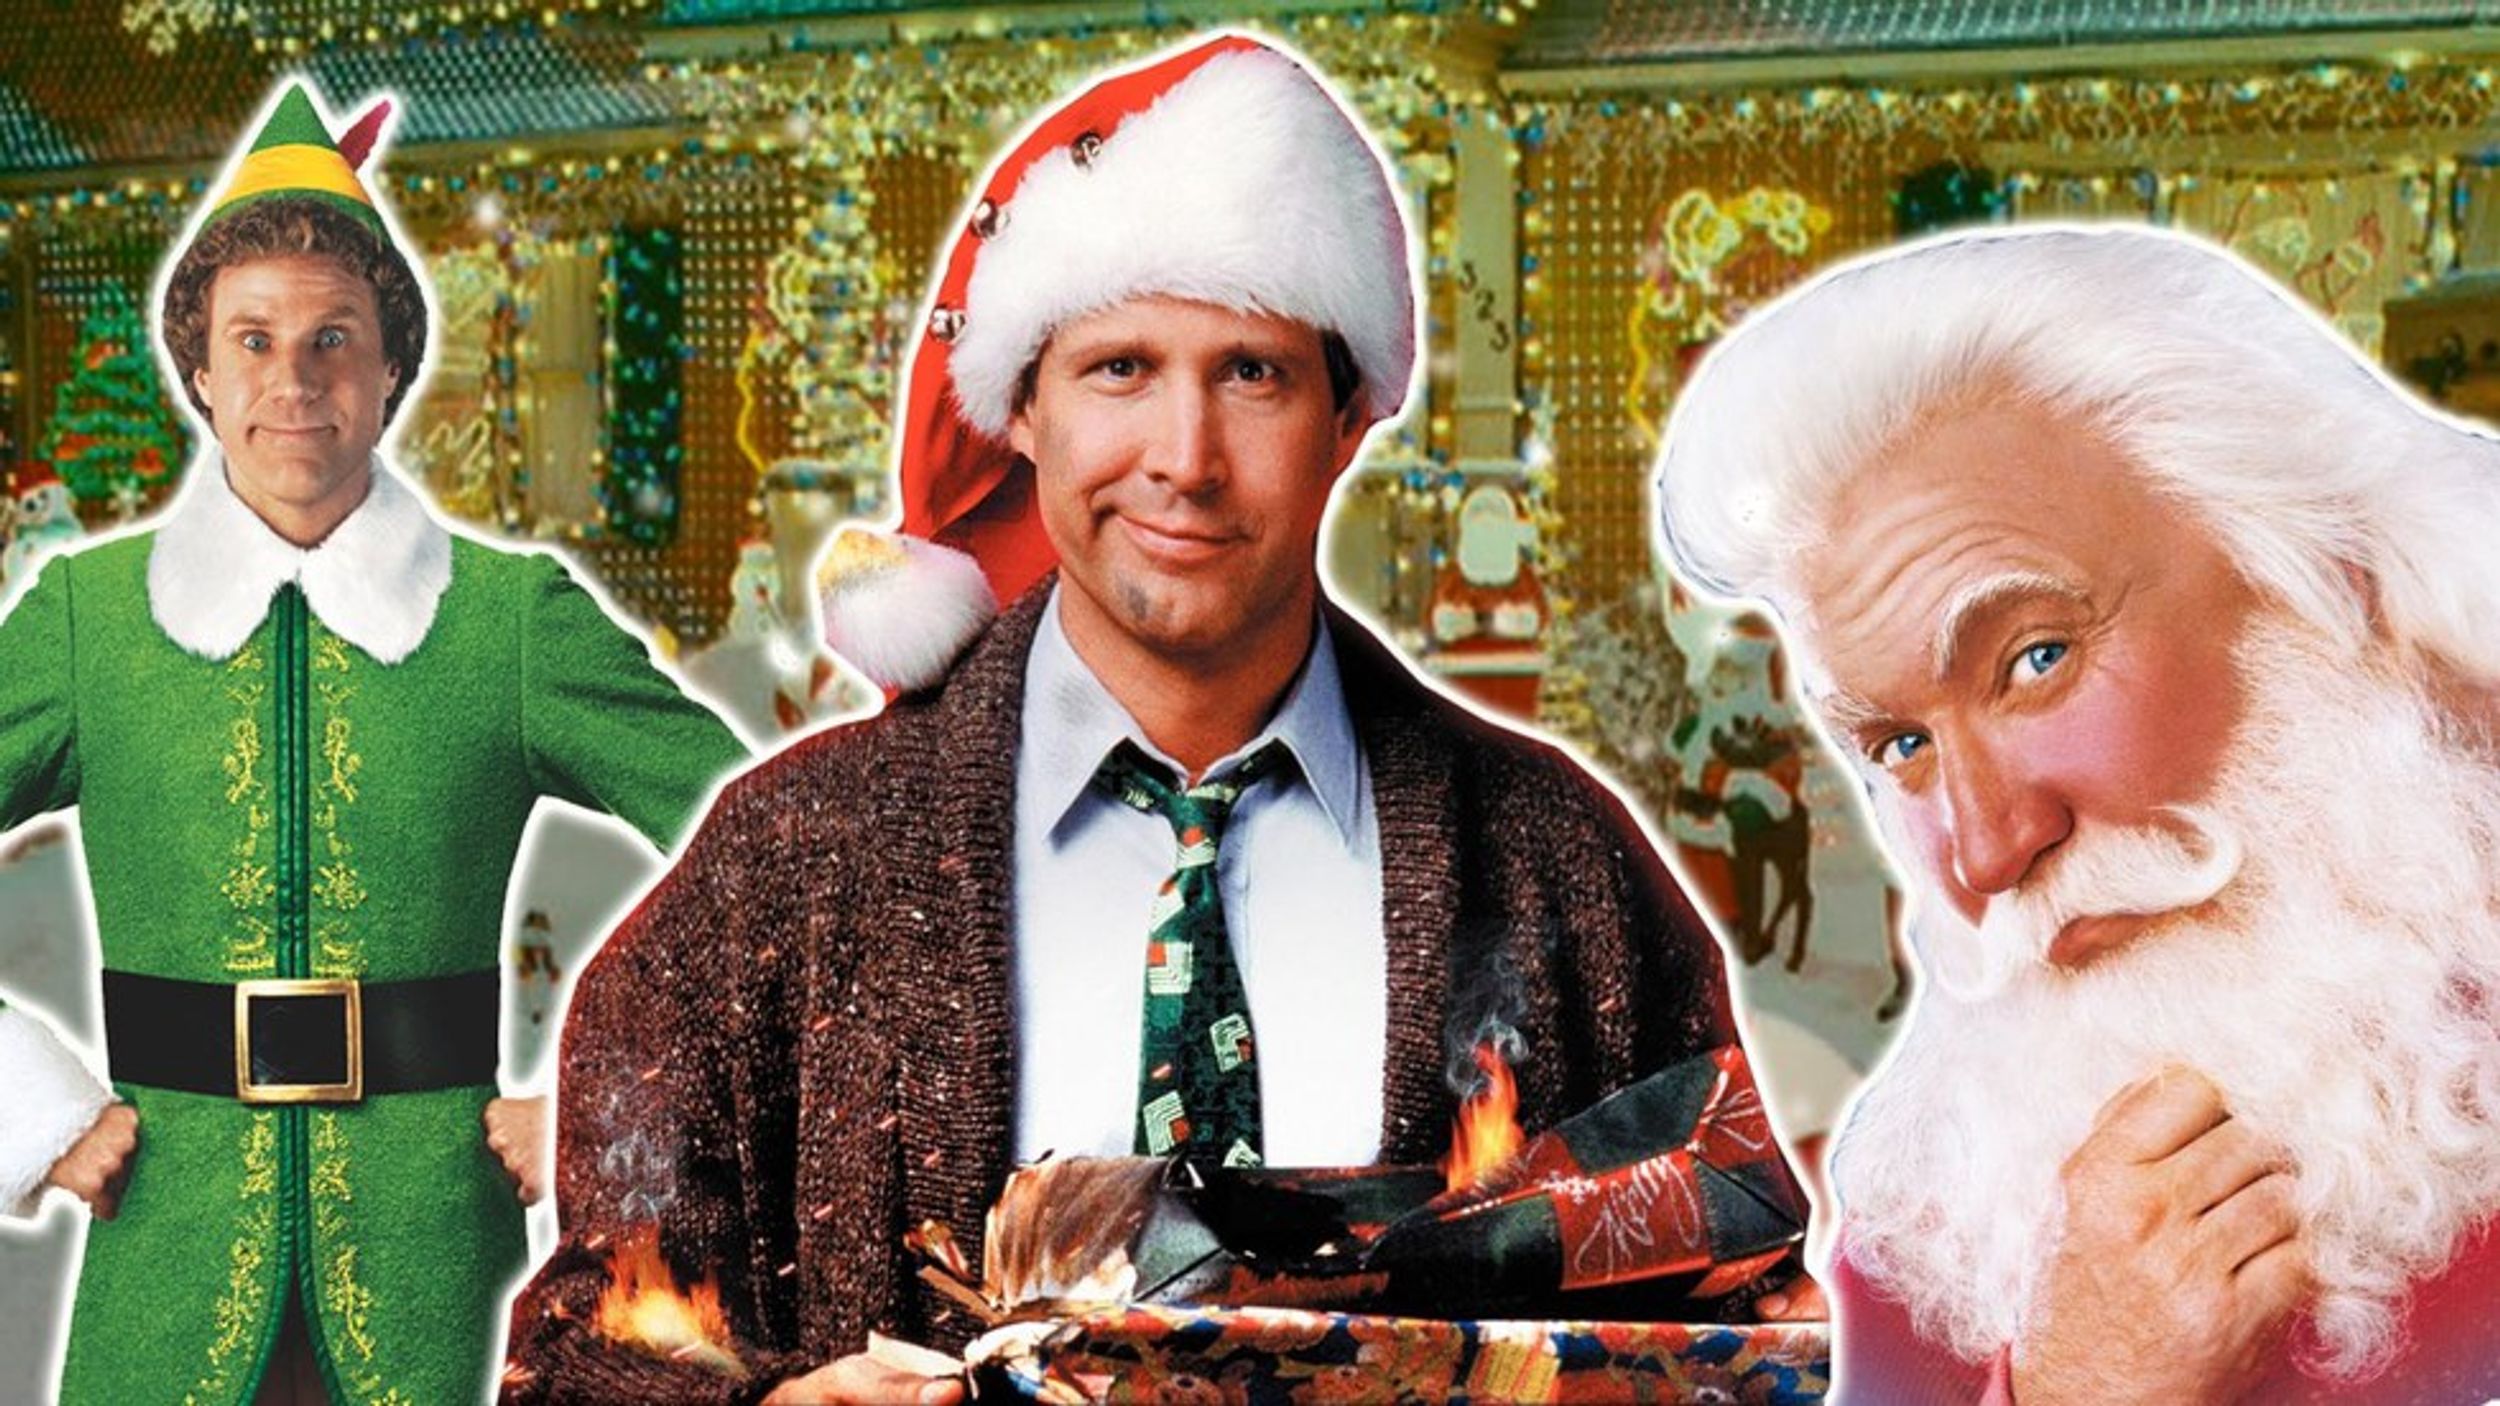 15 Christmas Movies to Get in the Holiday Spirit